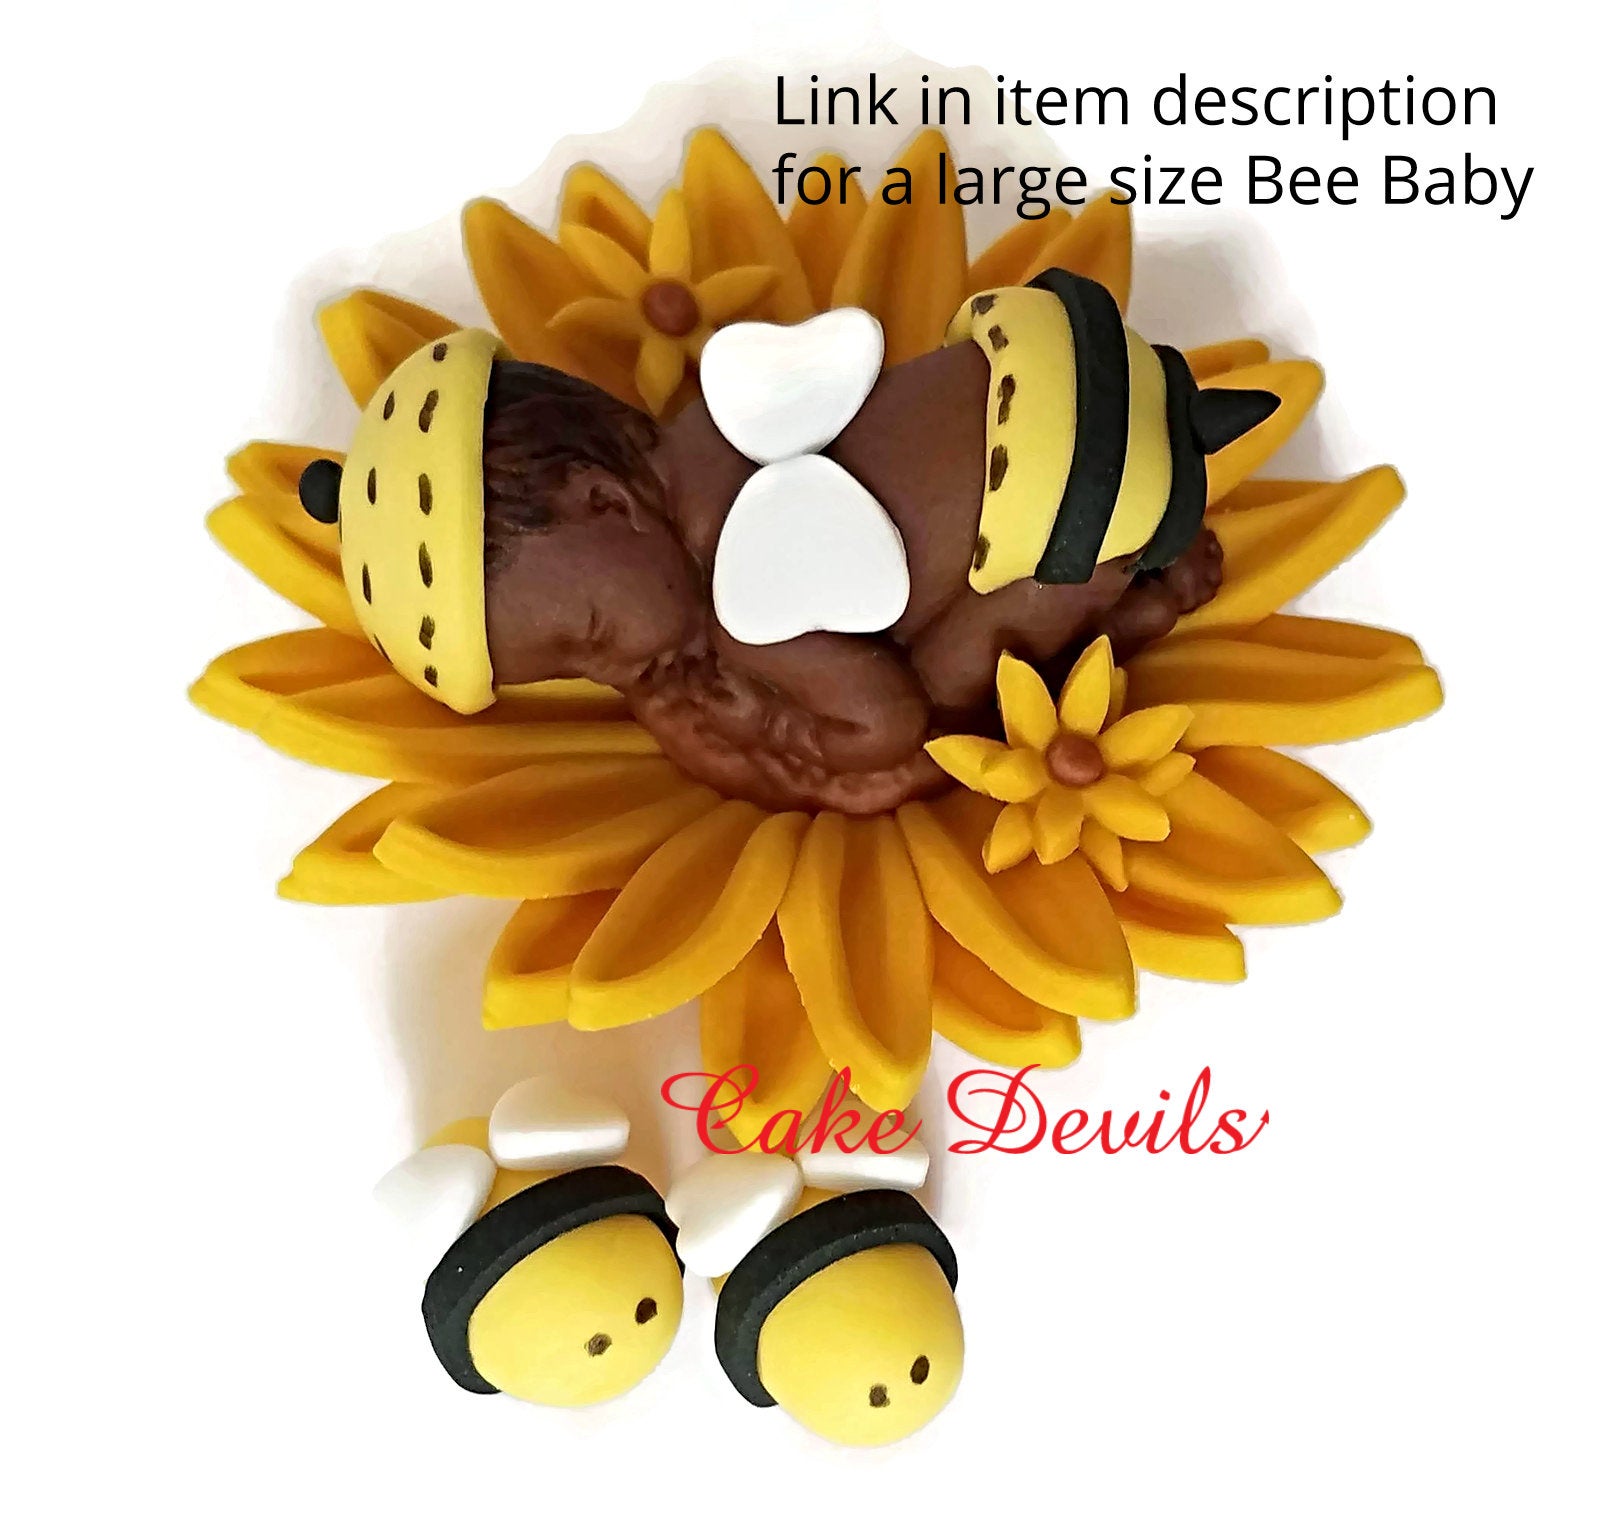 Sunflower Bumble Bee Baby Shower Cake Topper Yellow Peony Baby on Flower Cake  Topper Edible Fondant Flower Baby by Sweetnewcreations 